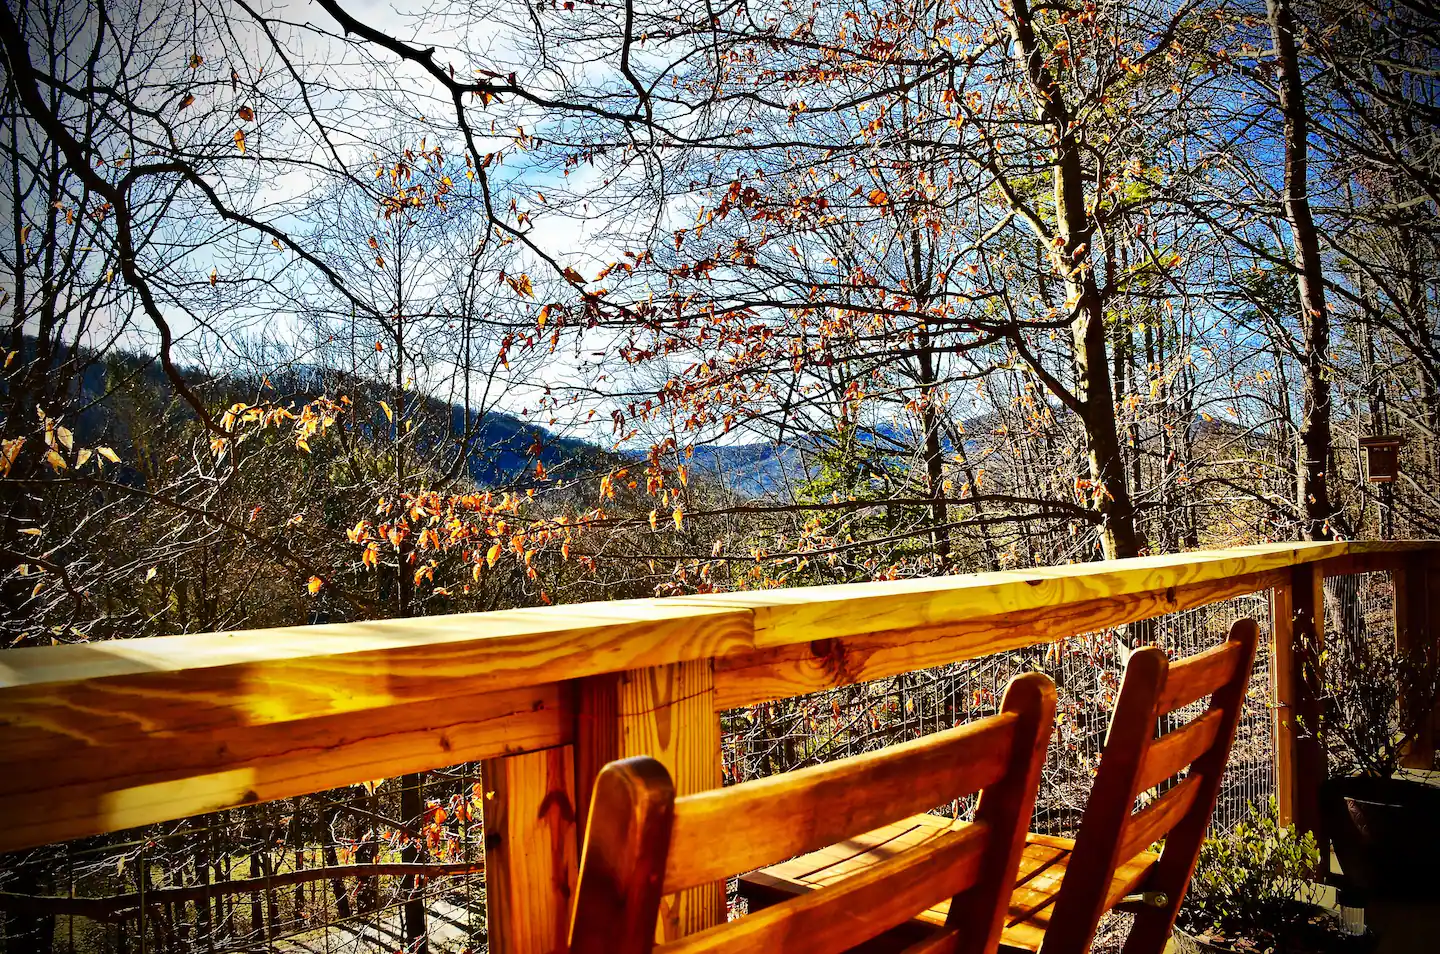 Lower deck eating area to enjoy your morning coffee while gazing out at the mountains in winter.